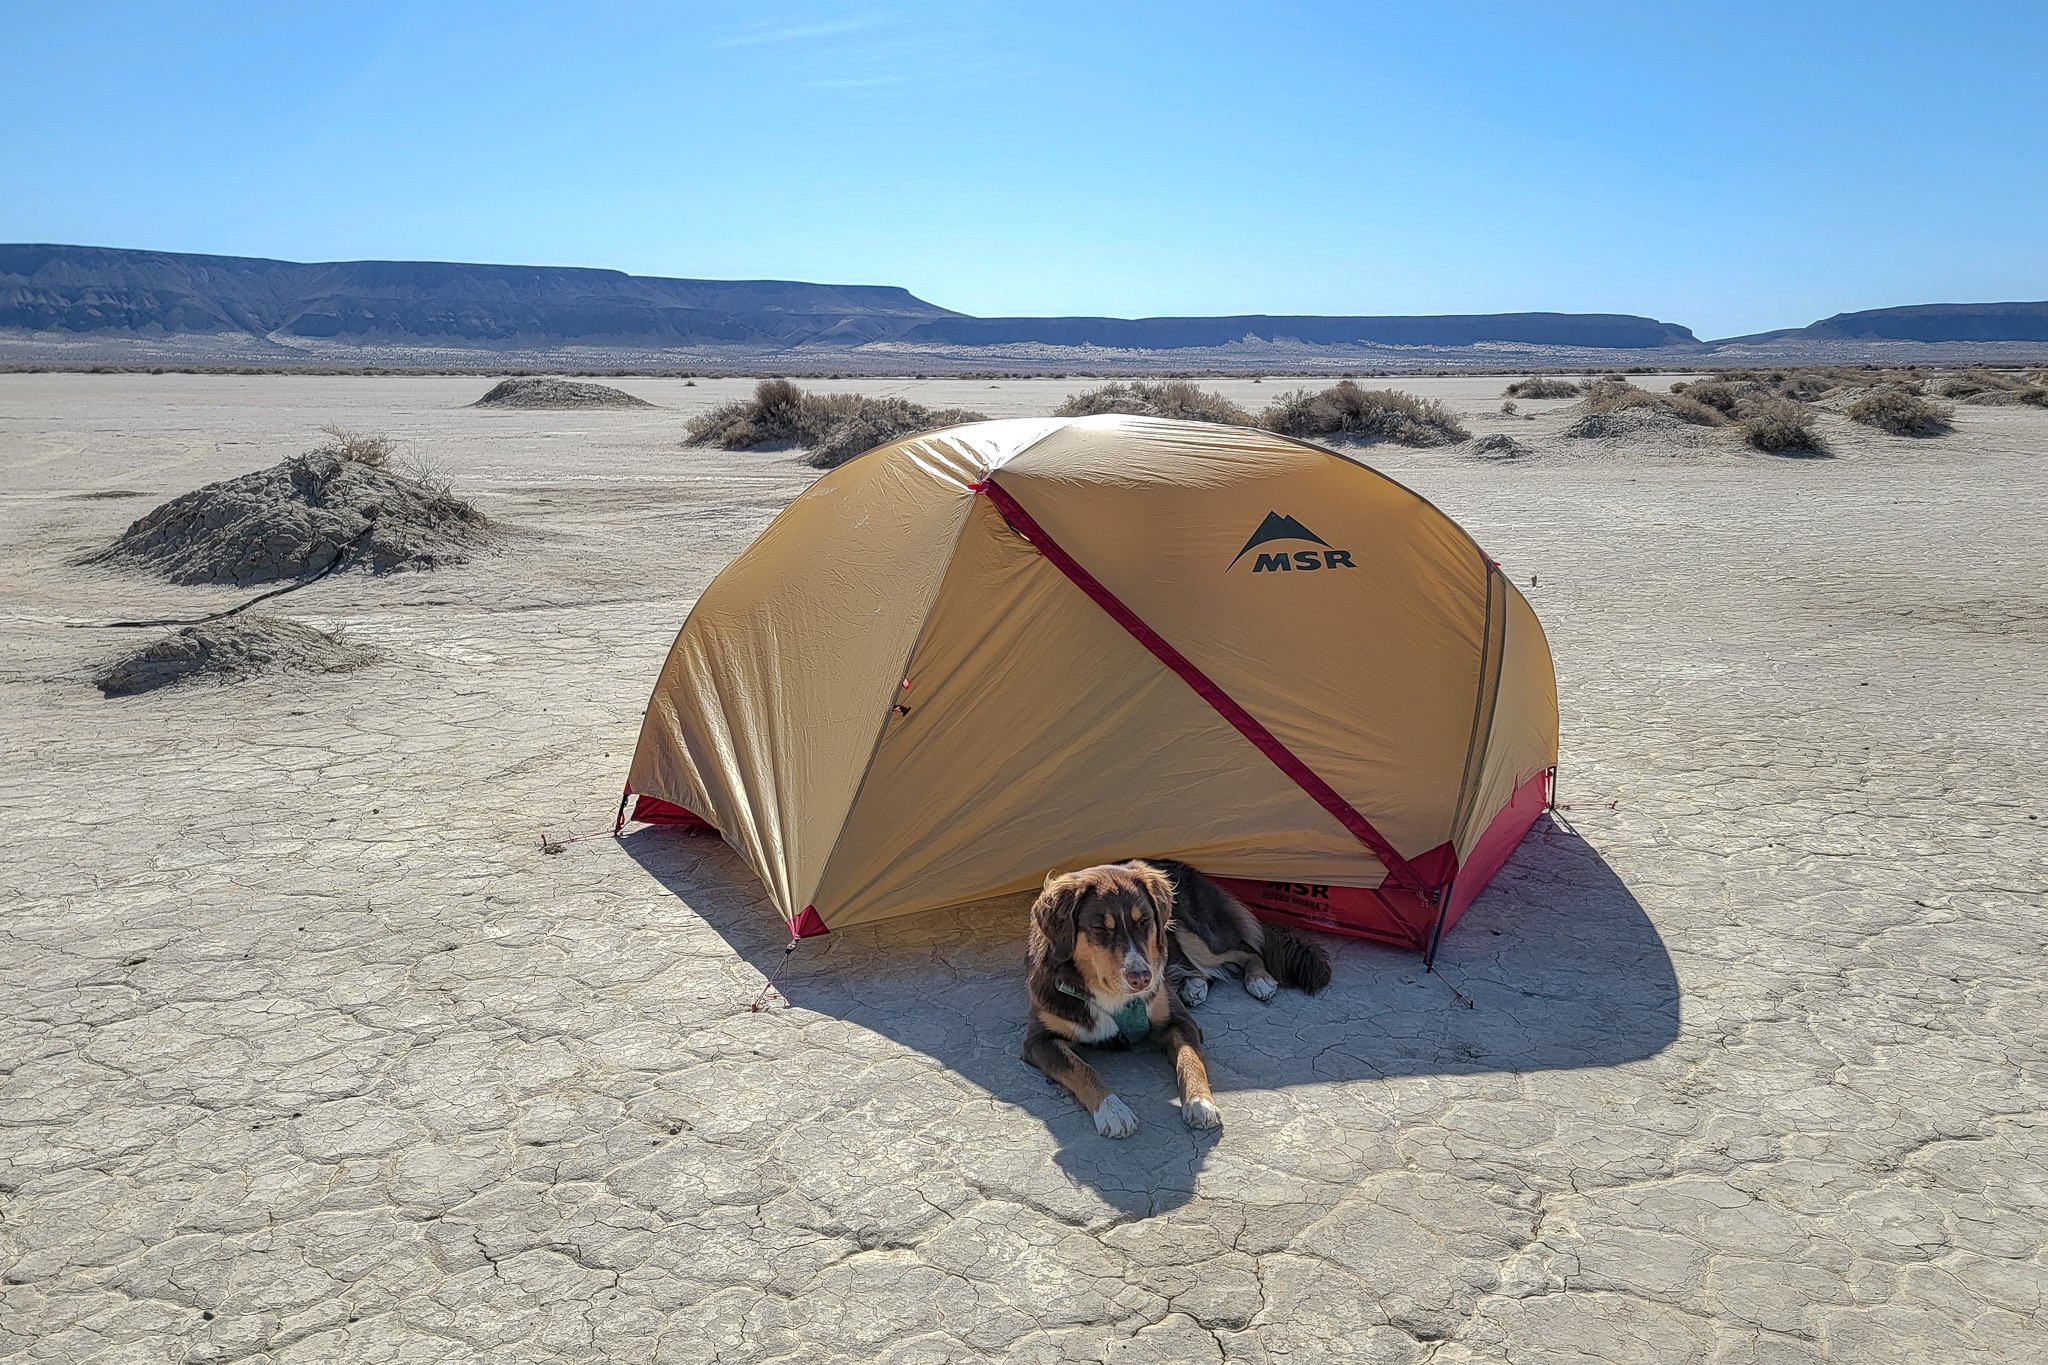 A dog laying in front of the MSR Hubba Hubba 2 tent in a desert